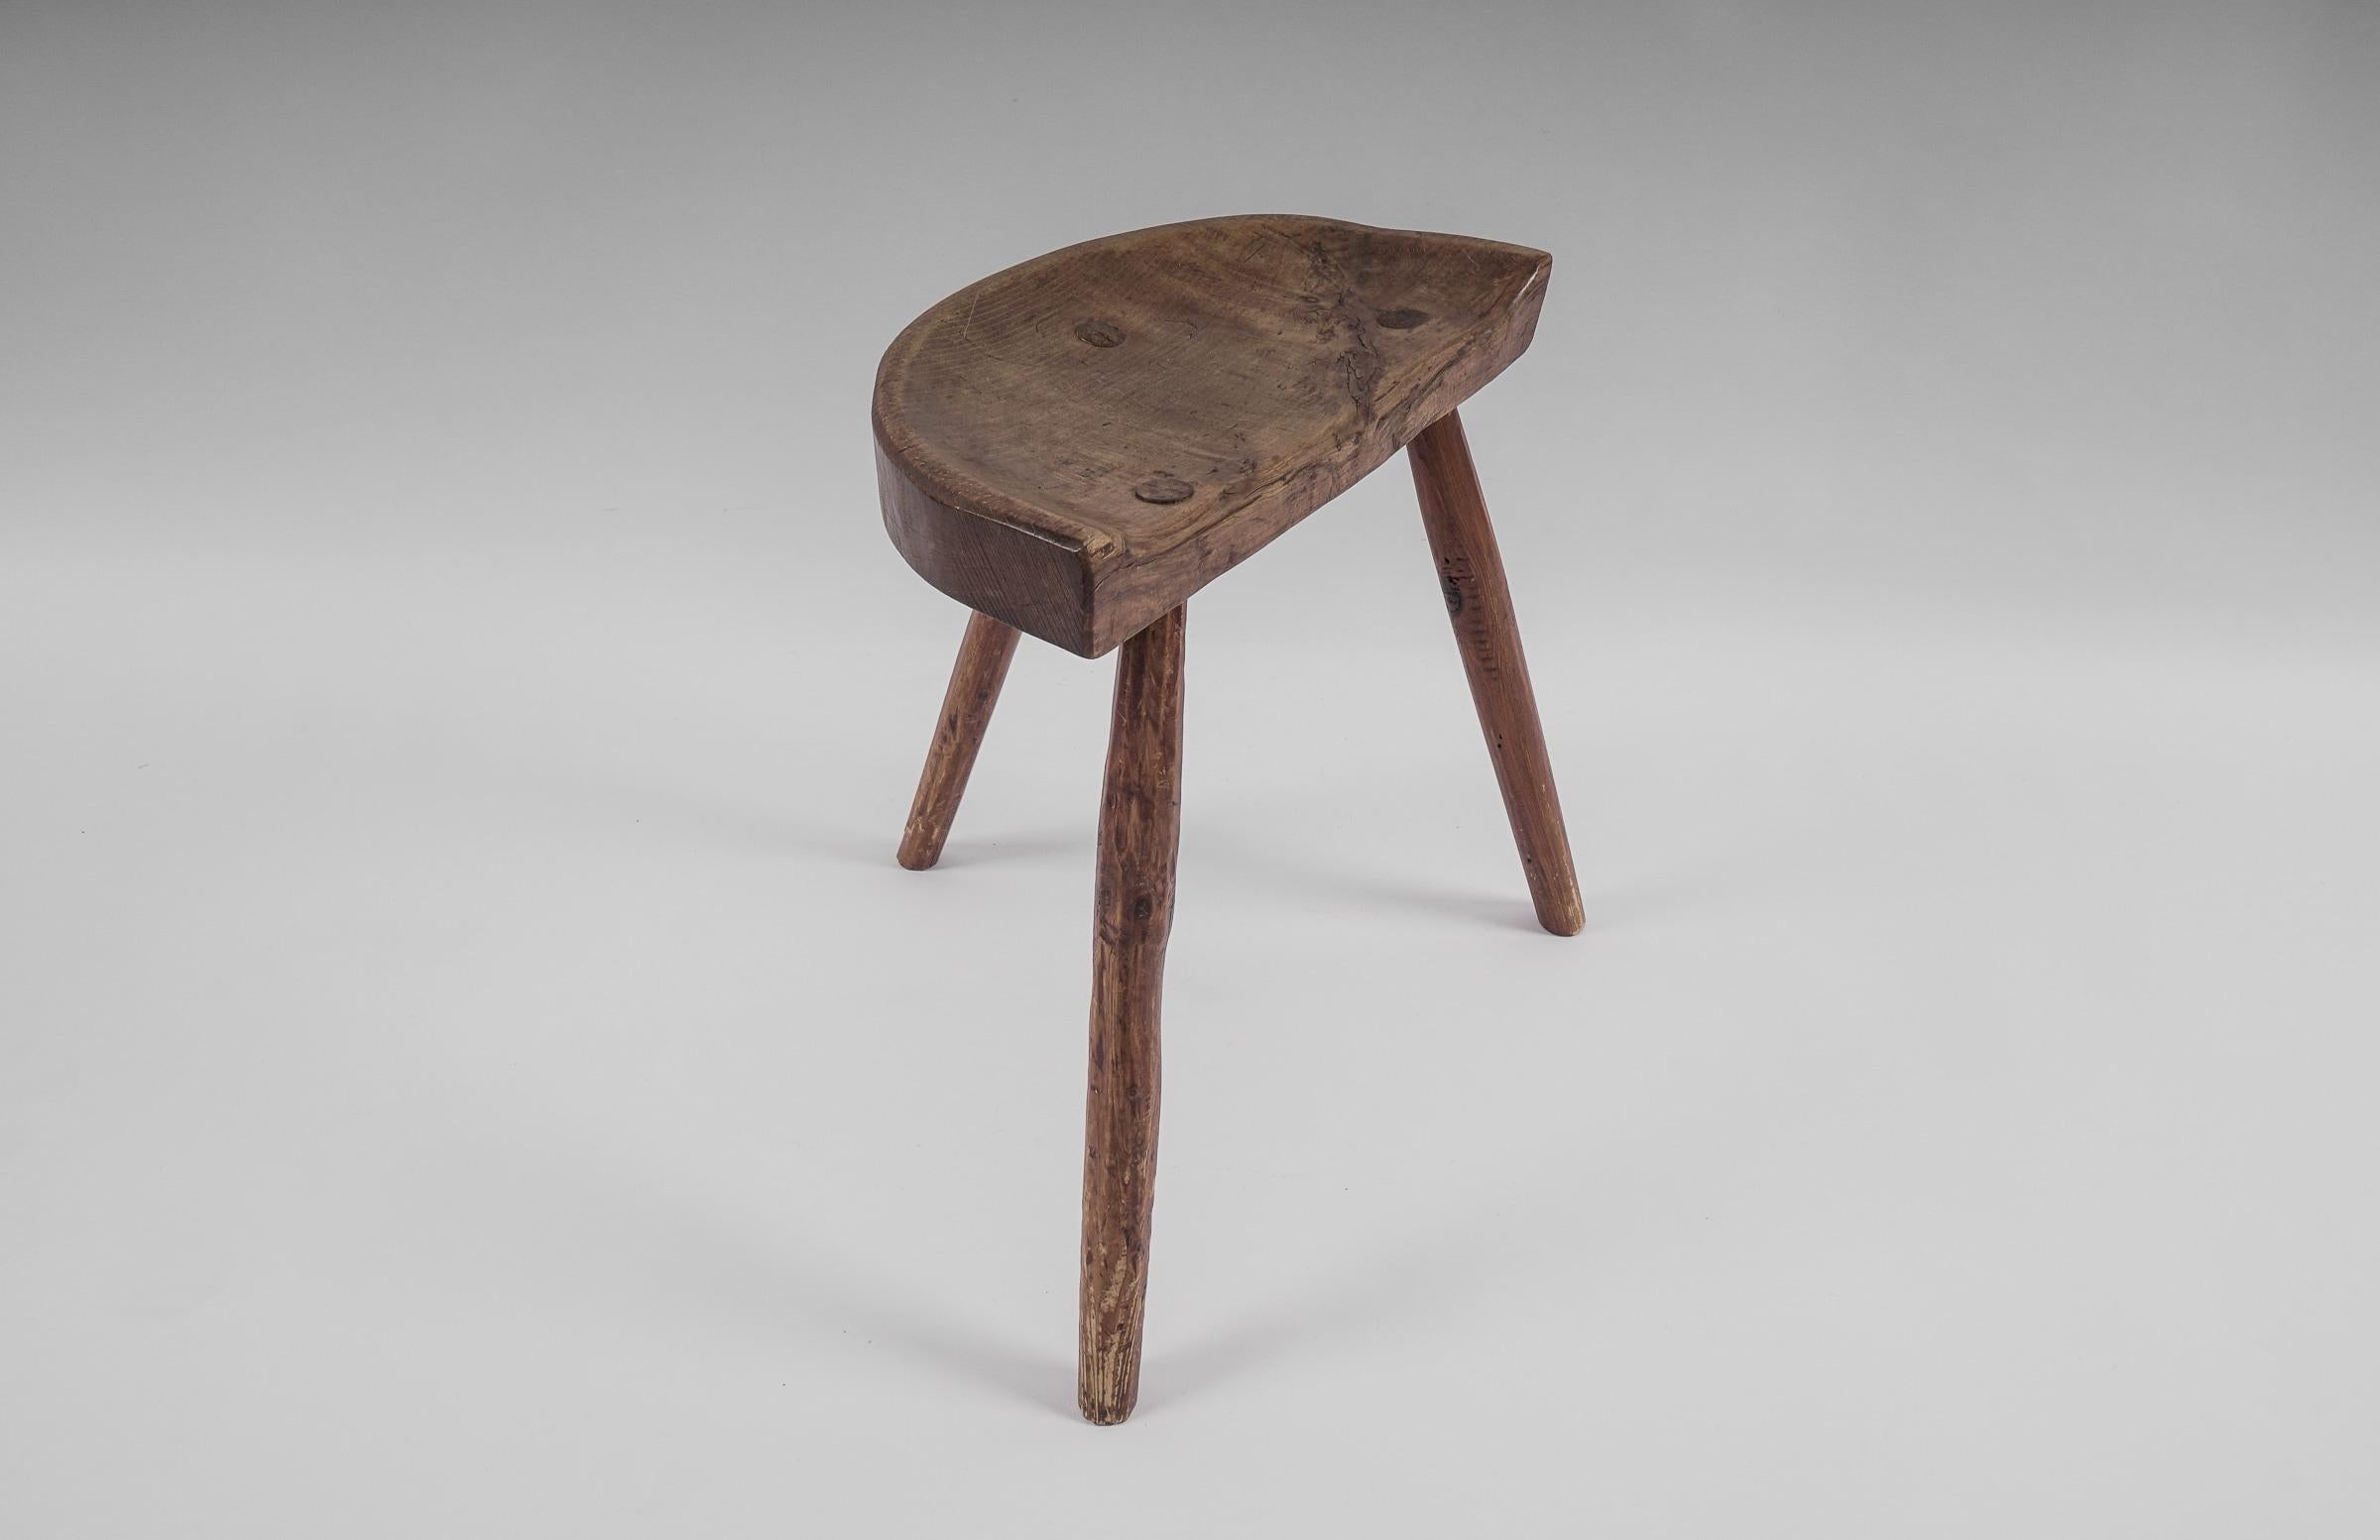 Hand-Crafted Mid-Century Modern Wooden Working Stool, 1960s France